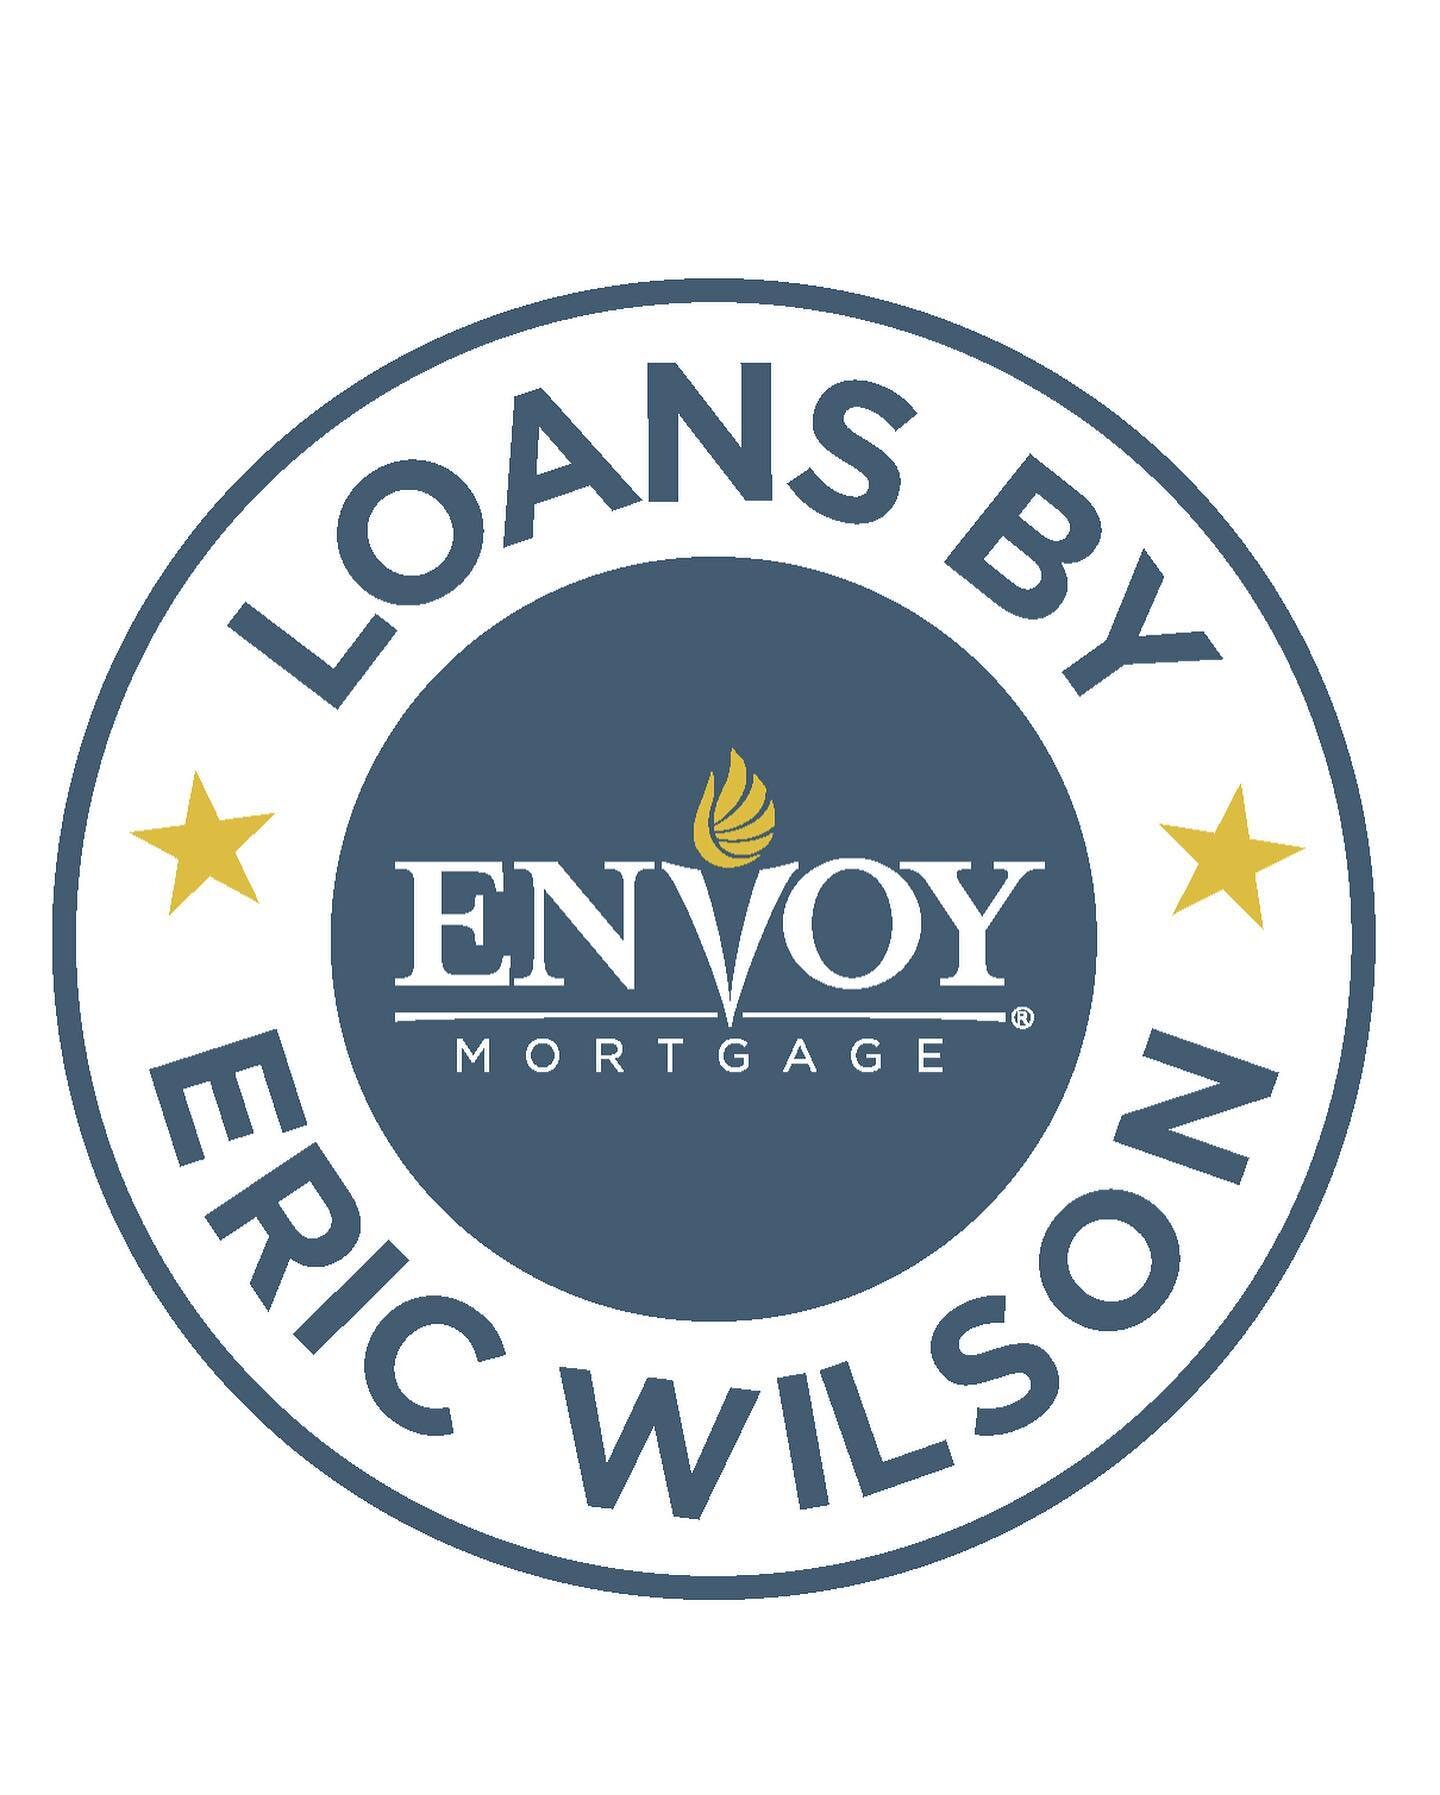 We're excited to announce our 1st ever sponsor: Eric Wilson - Envoy Mortgage @Loans.by.Eric! His generous contribution has gone to support our team as we represent Minnesota at the 2022 IGLA Championships in Palm Springs, California. 

Welcome to the